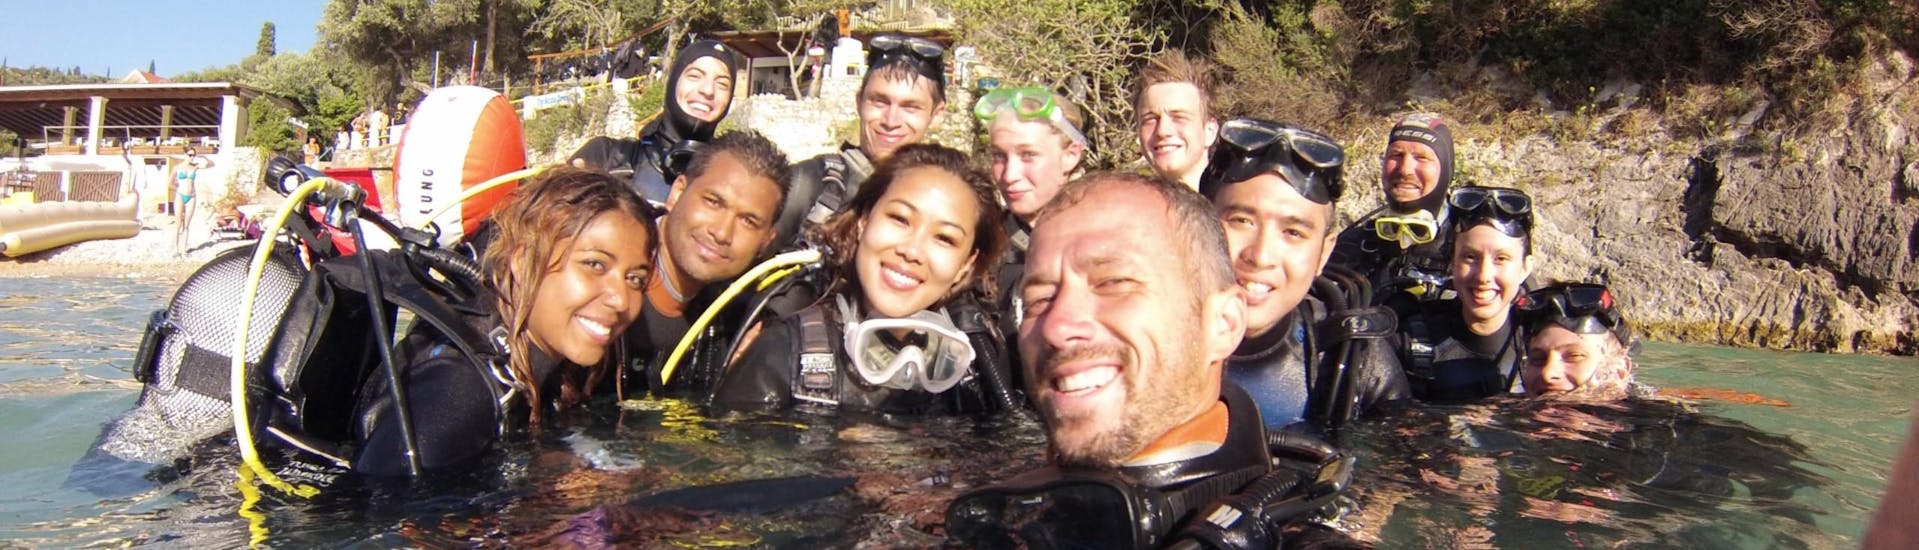 A diving instructor from Achilleon Diving Center Corfu is taking a selfie with a group of people taking part in the PADI Open Water Diver Course in Paleokastritsa for Beginners.